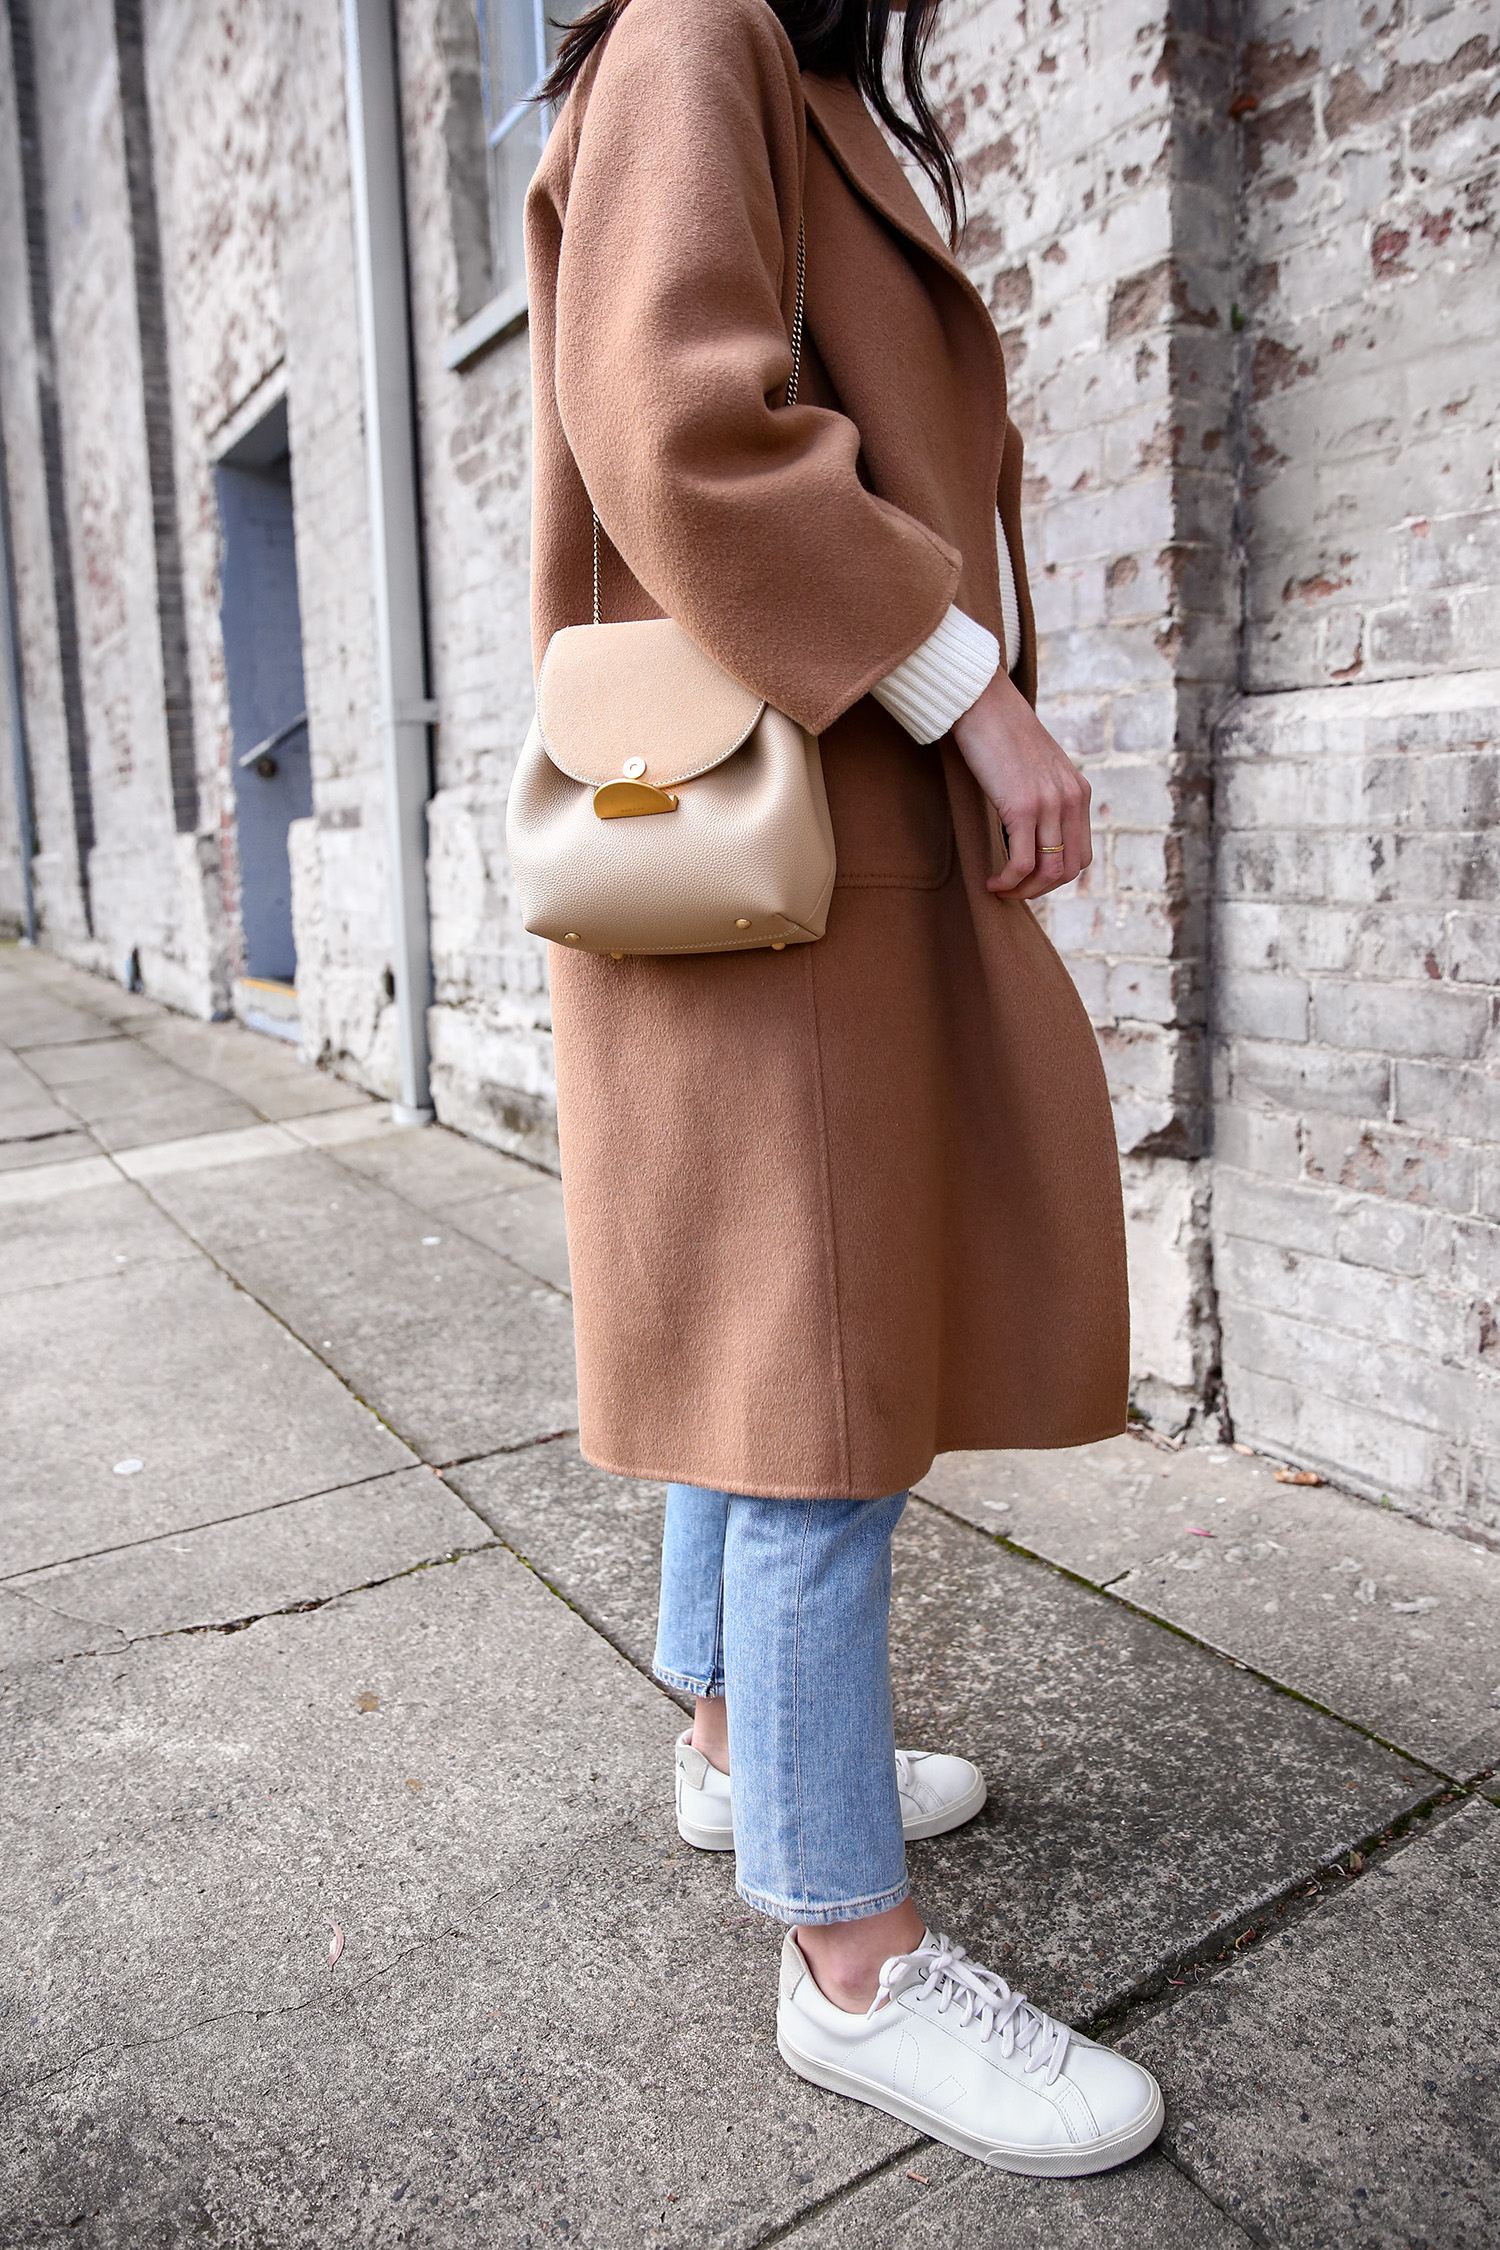 Jamie Lee of Mademoiselle wearing Citizens of Humanity Emerson Jeans and The Curated Coat